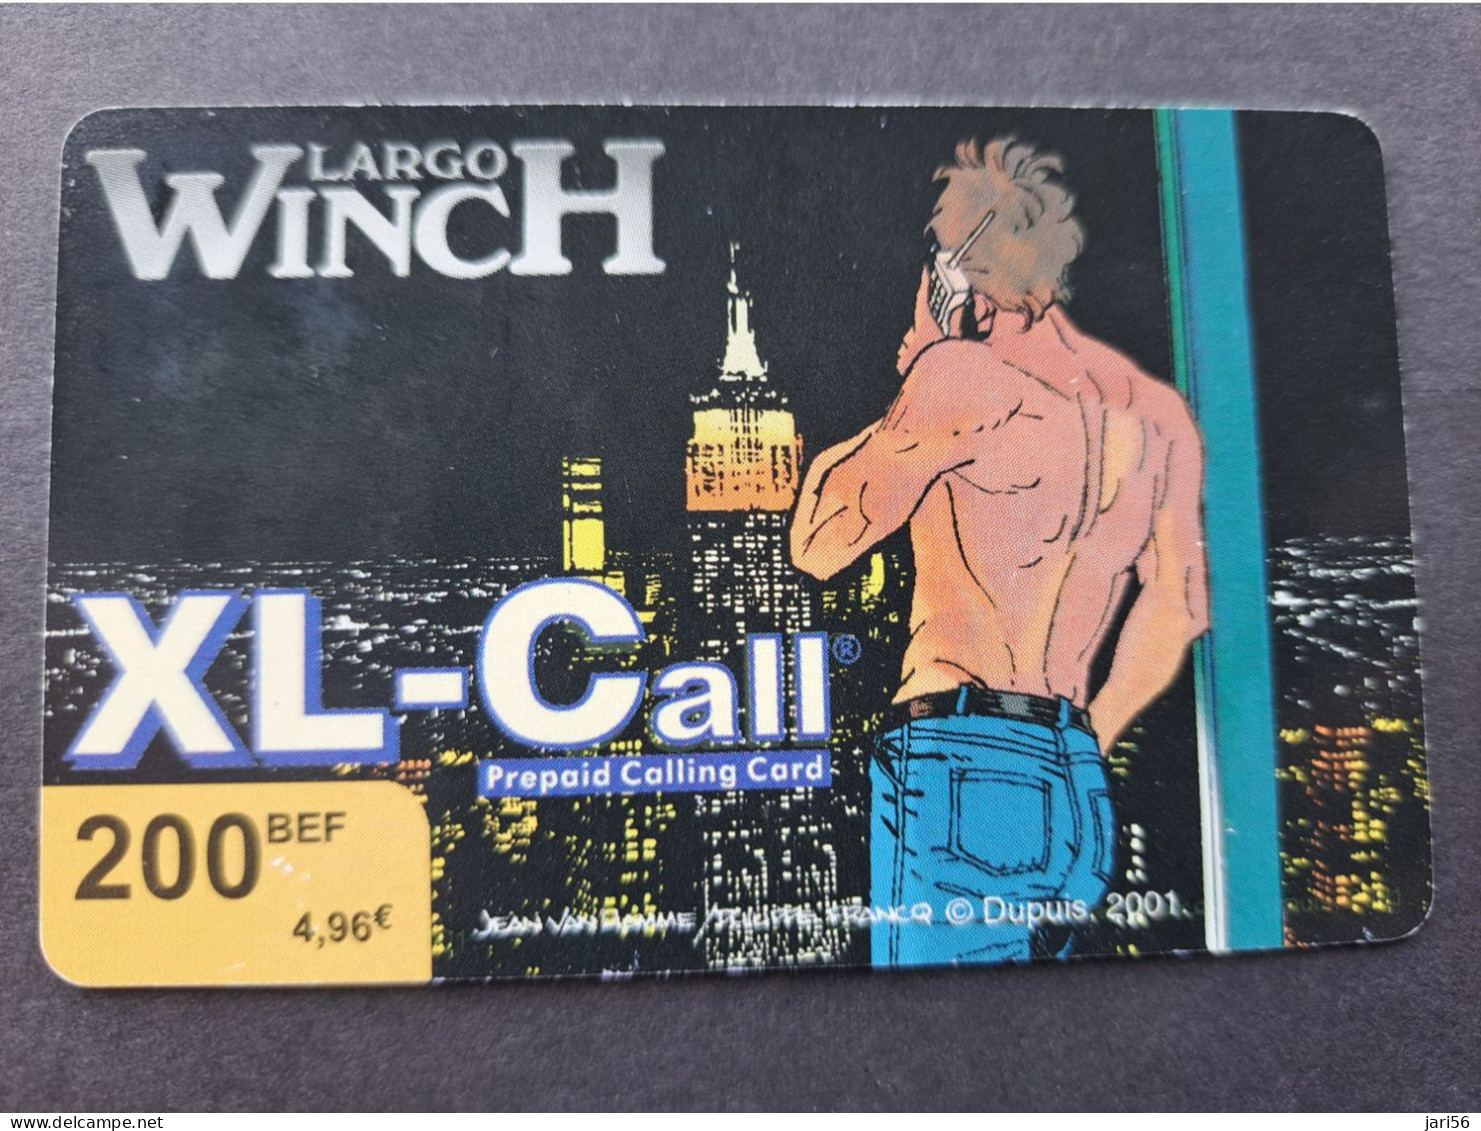 BELGIUM / XL-CALL € 4,96  /  LARGO- WINCH PREPAID /CITY BY NIGHT/    USED  CARD  ** 16617 ** - Sans Puce